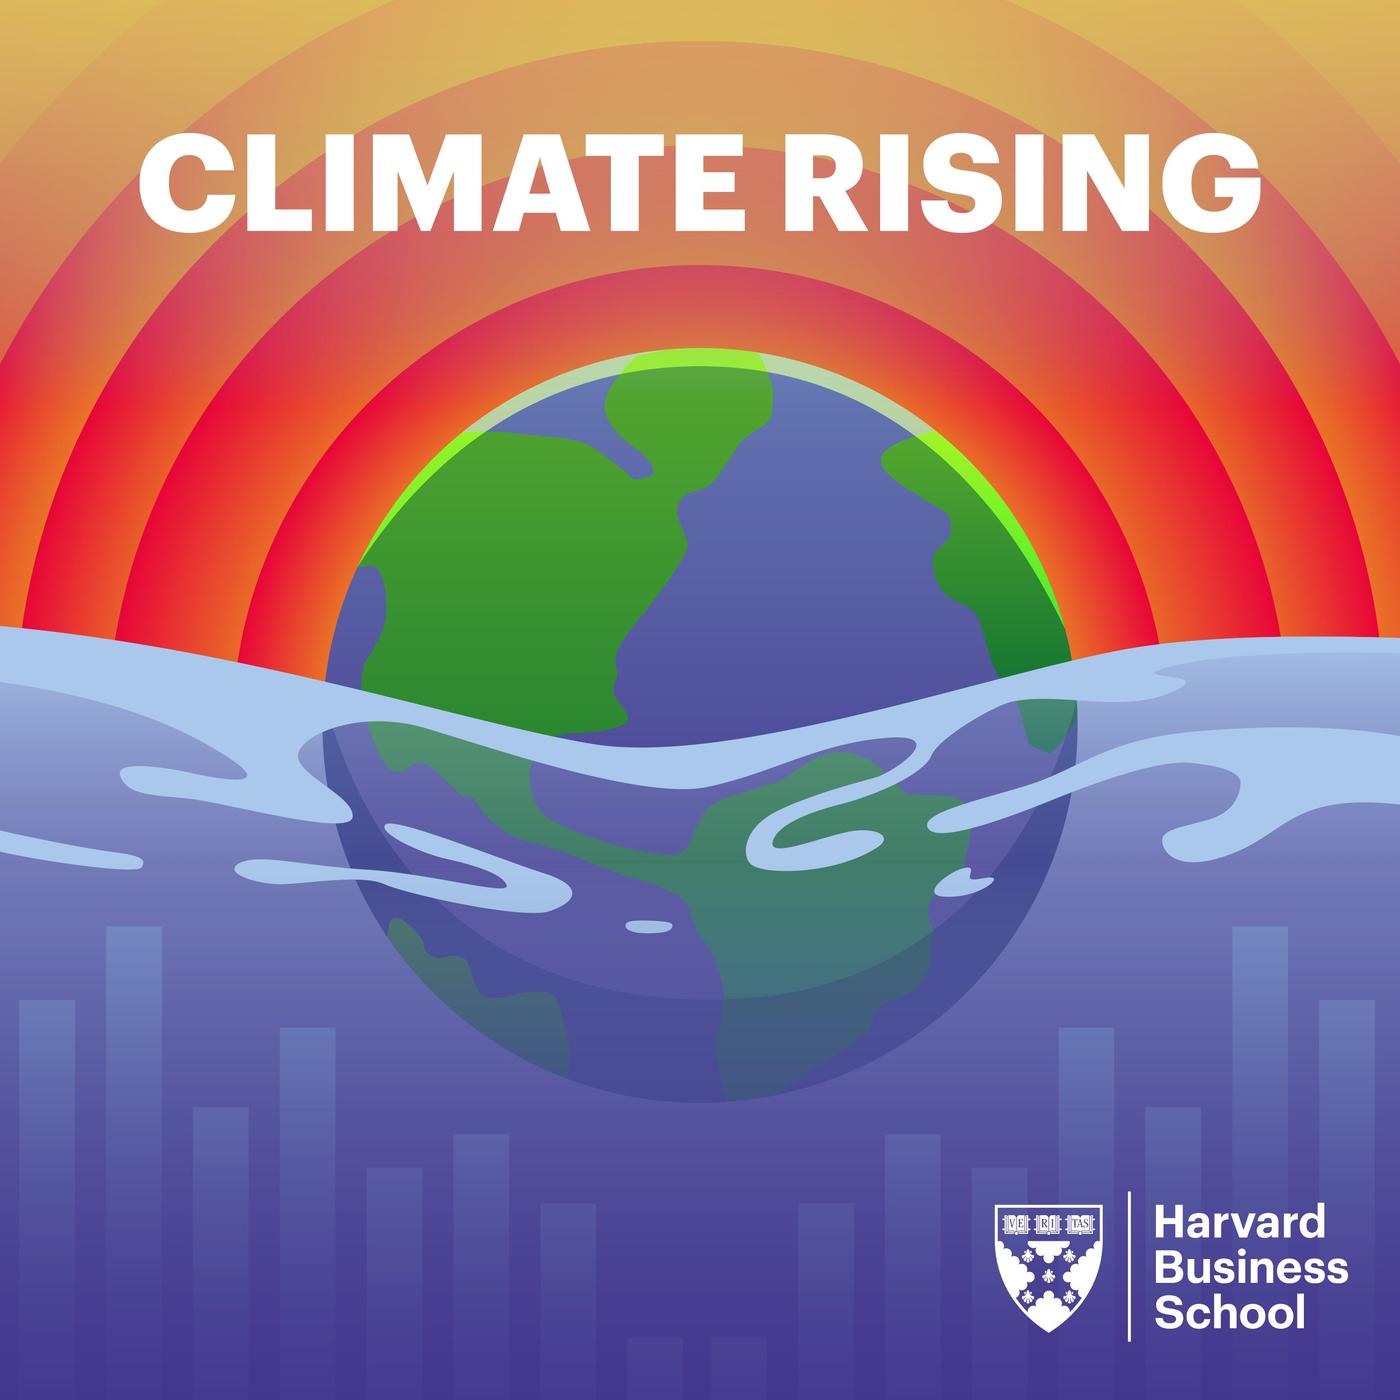 BCG Presents: Climate Rising – How BCG Uses AI to Address Climate Change